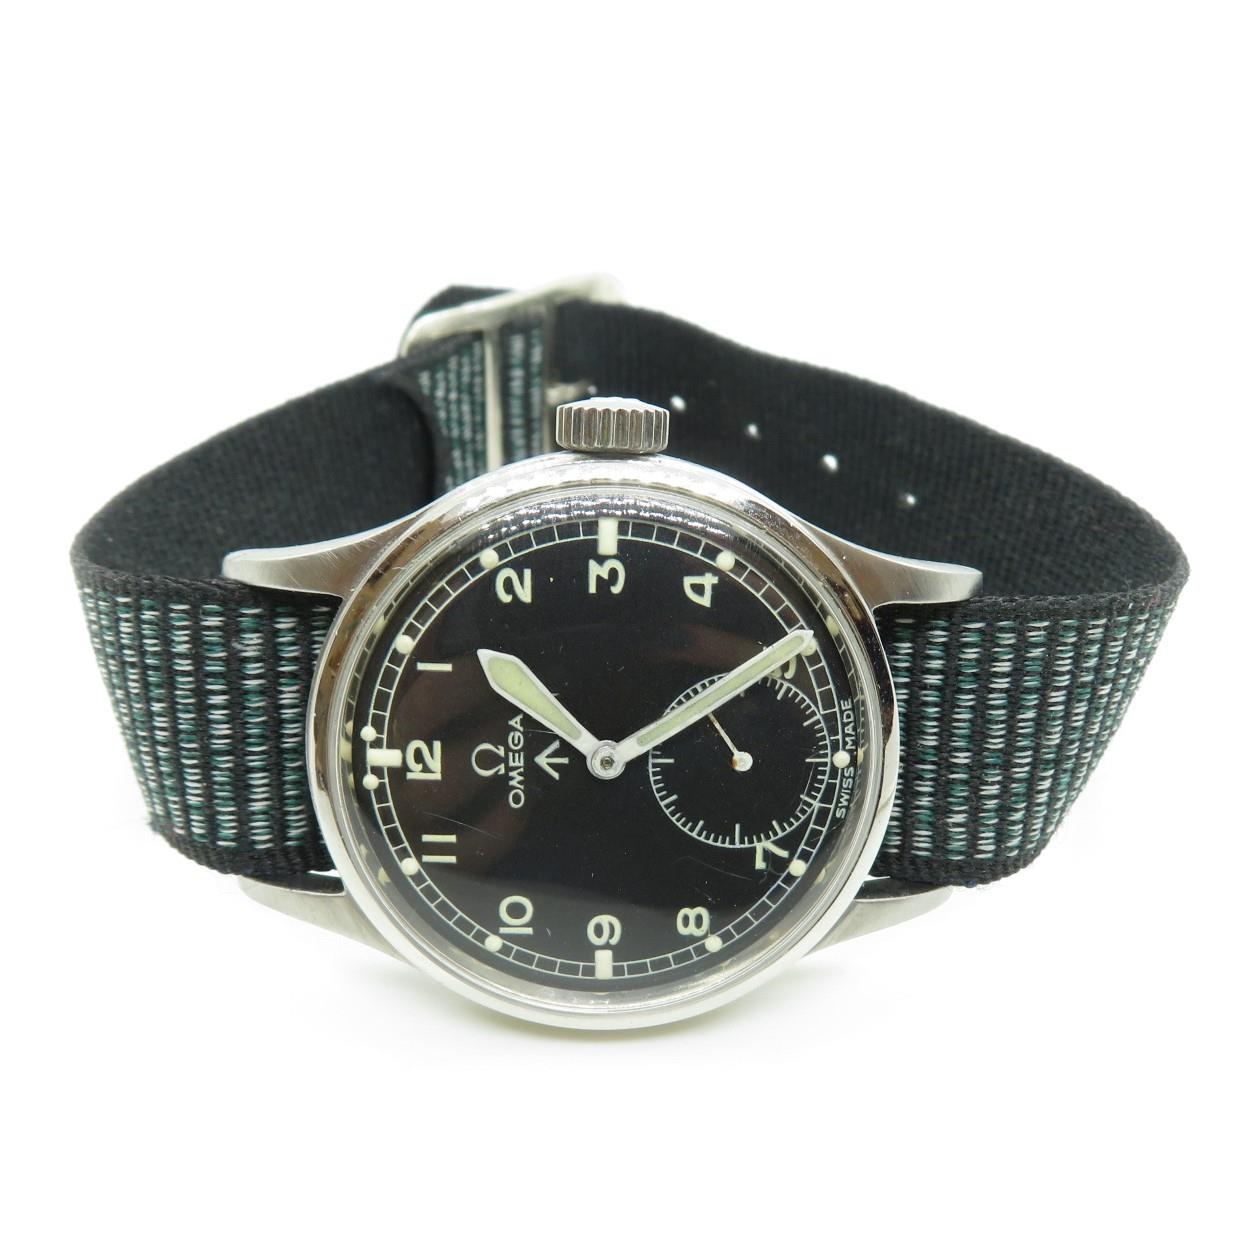 Vintage Gents OMEGA Military Issued WRISTWATCH Hand-Wind WORKING Vintage Gents OMEGA Military Issu - Image 6 of 7